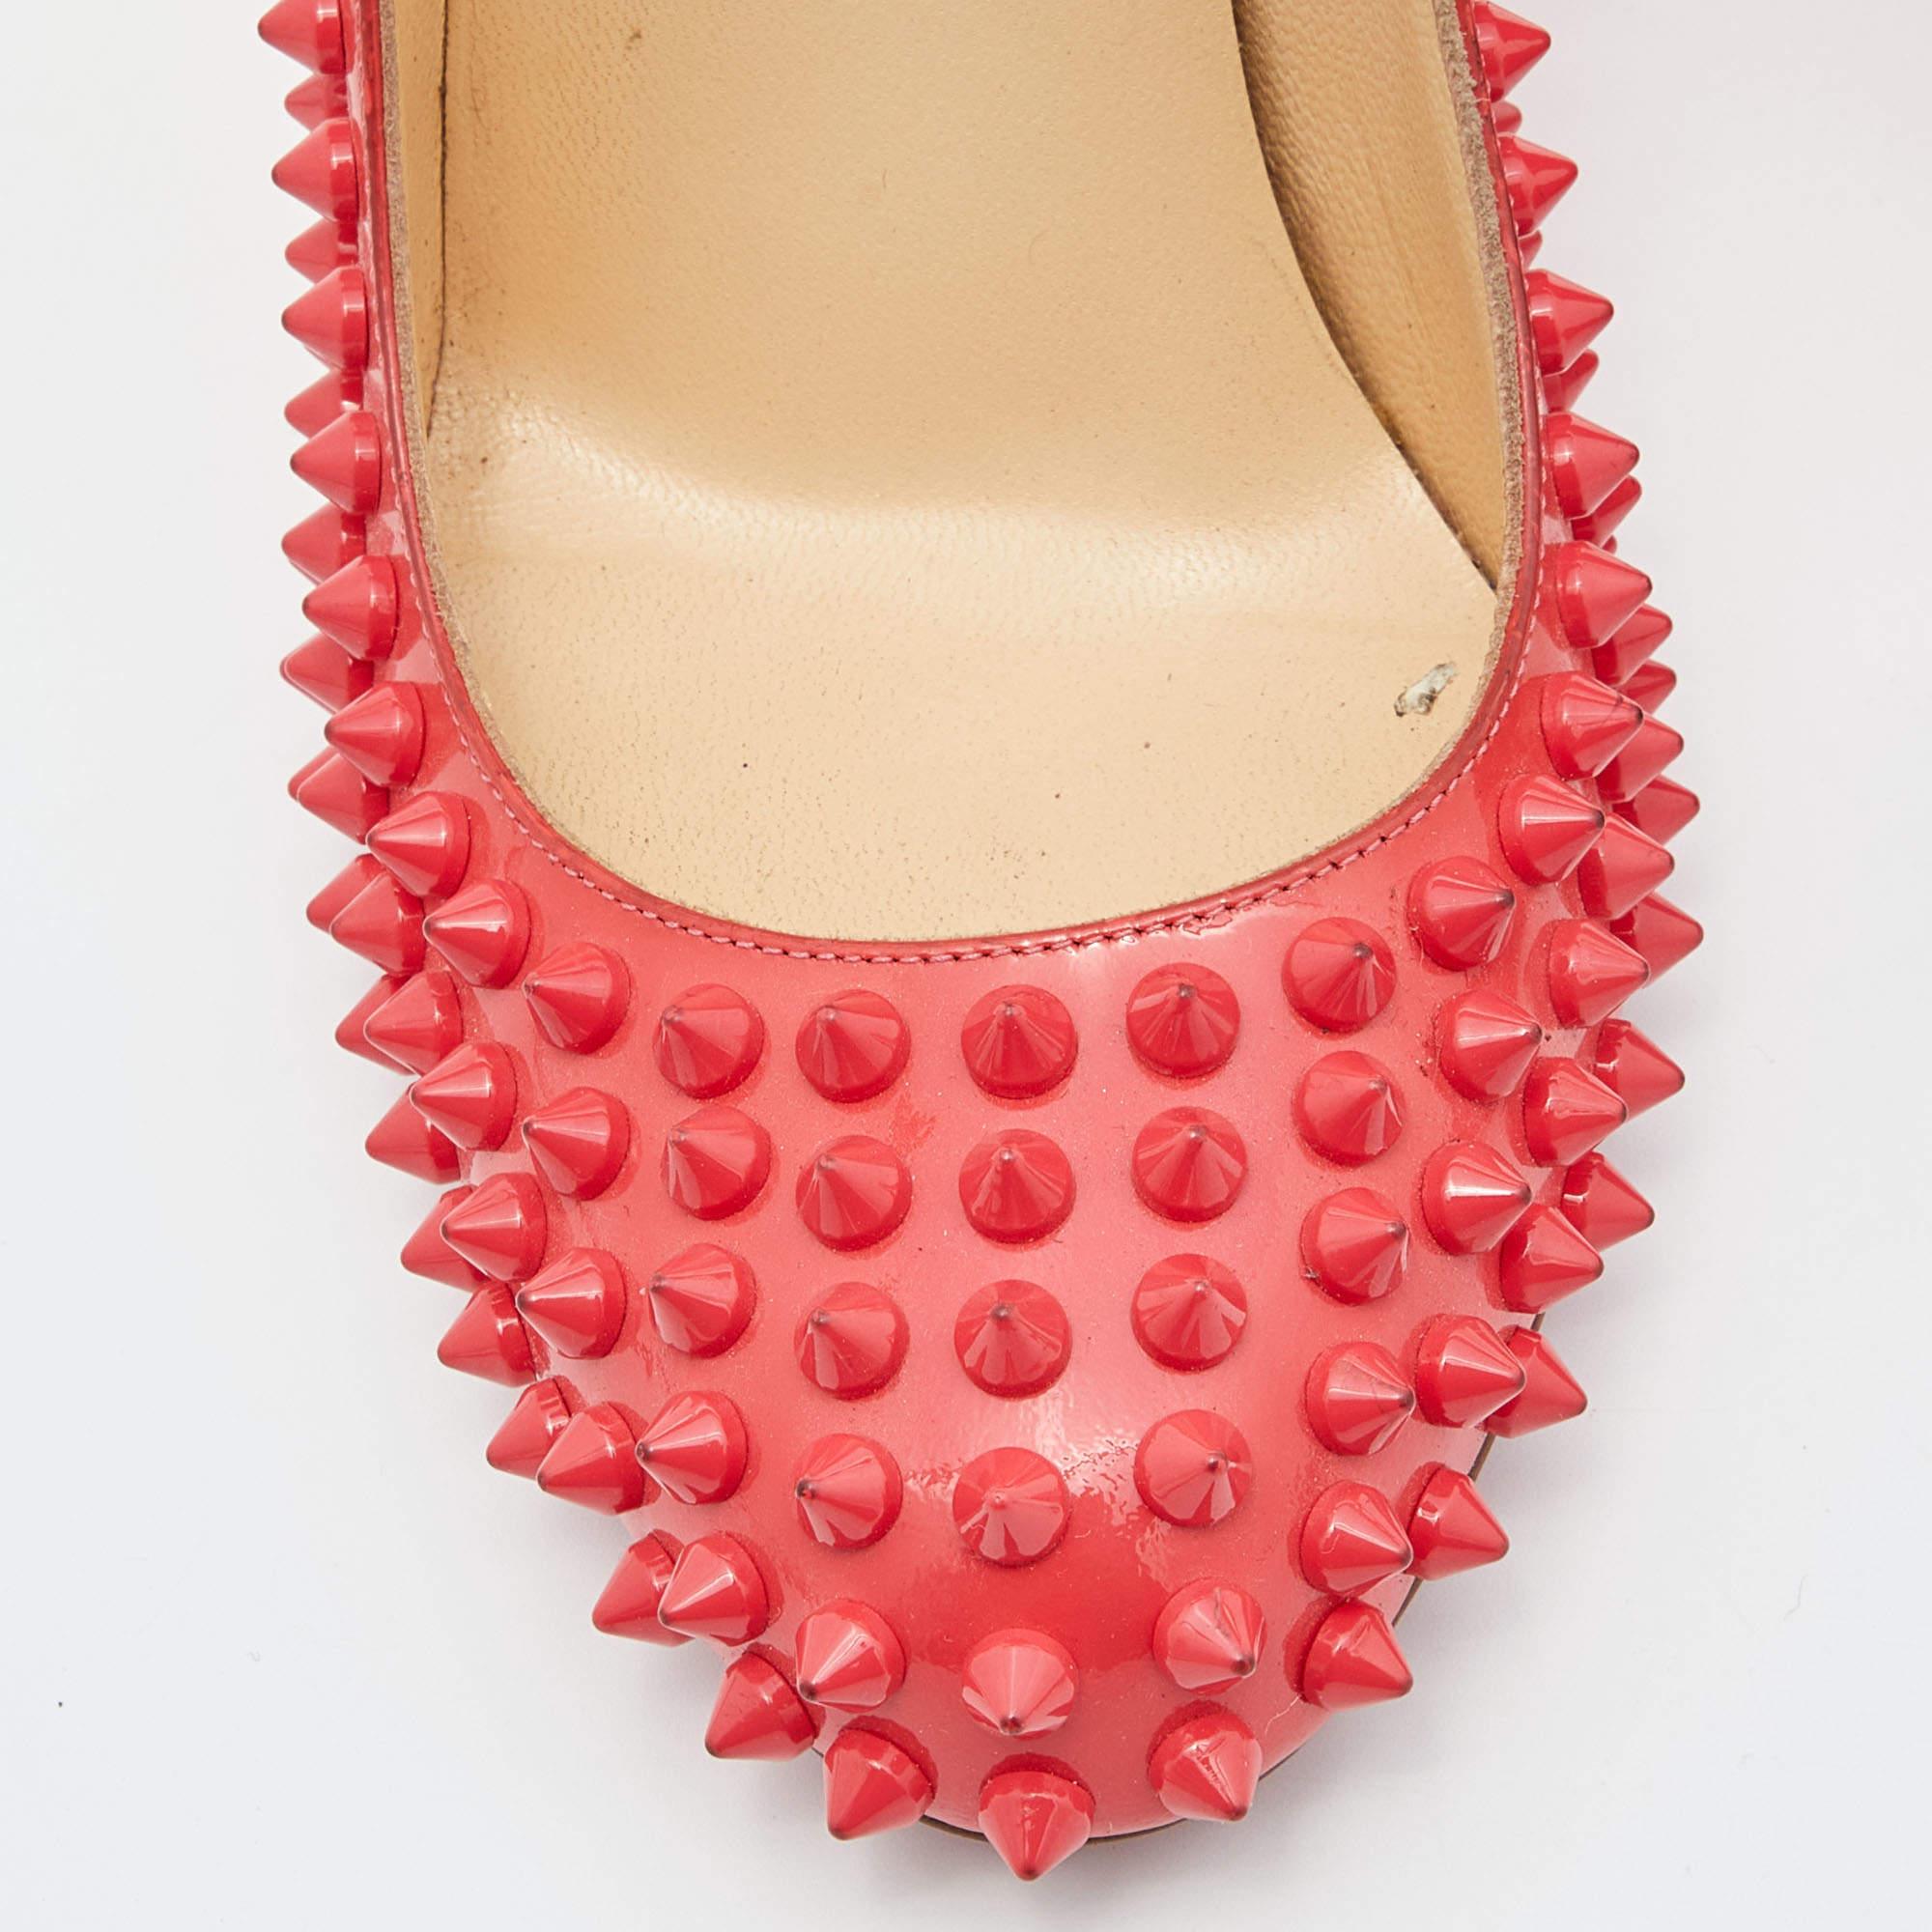 Christian Louboutin Coral Pink Patent Leather Fifi Spikes Pumps Size 36.5 For Sale 3